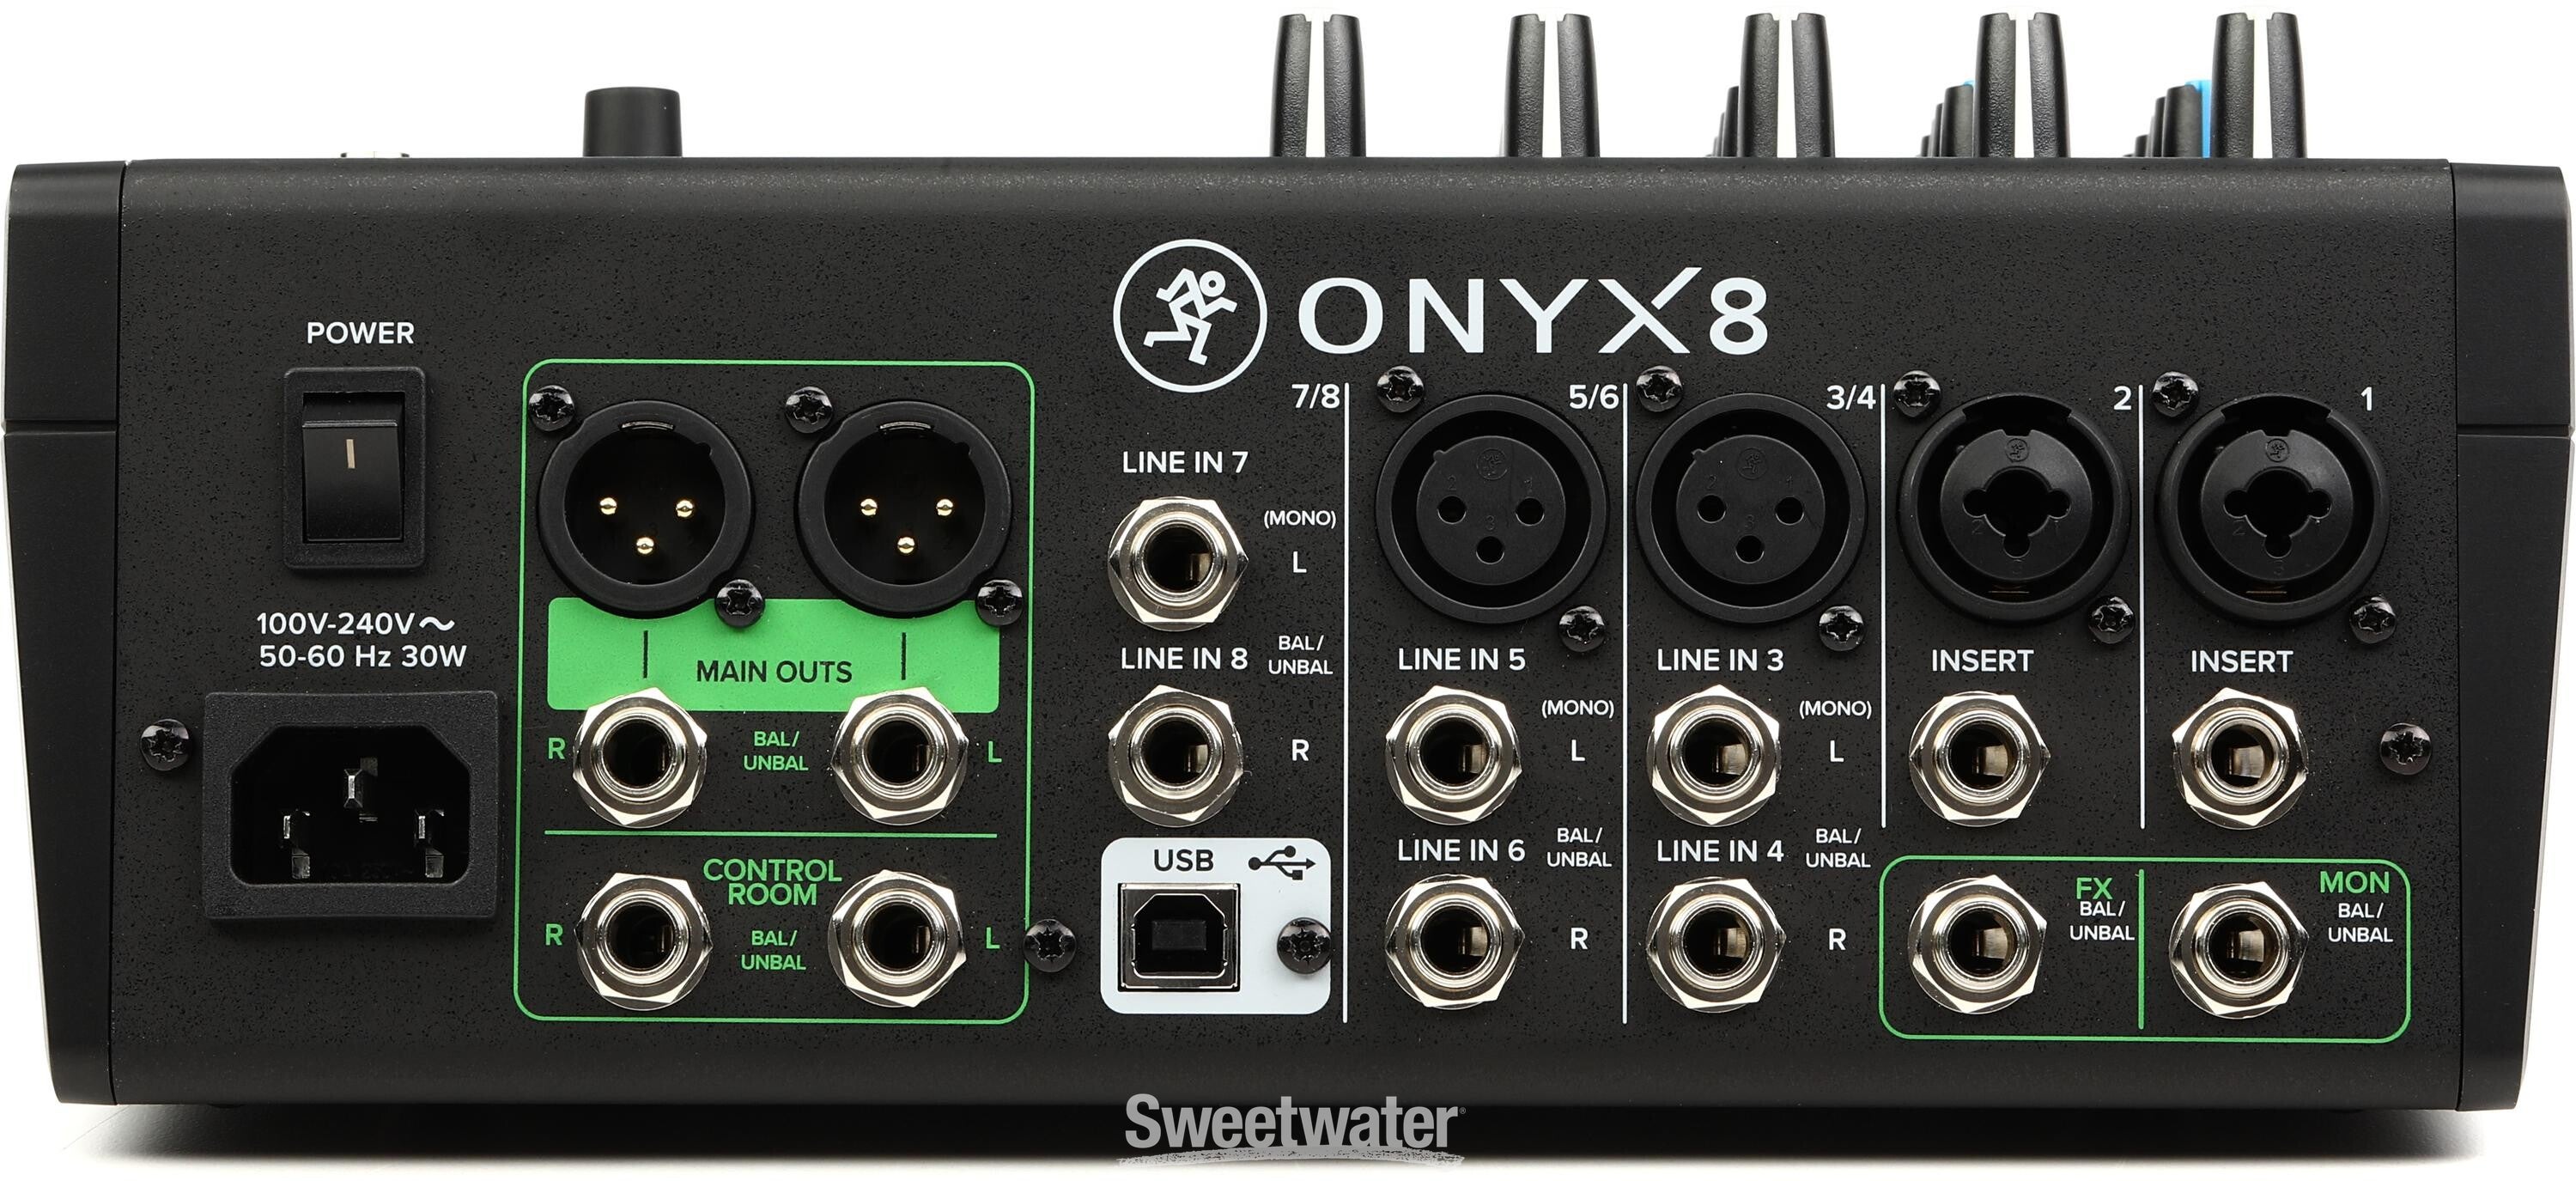 Mackie Onyx8 8-channel Analog Mixer with Multi-Track USB | Sweetwater